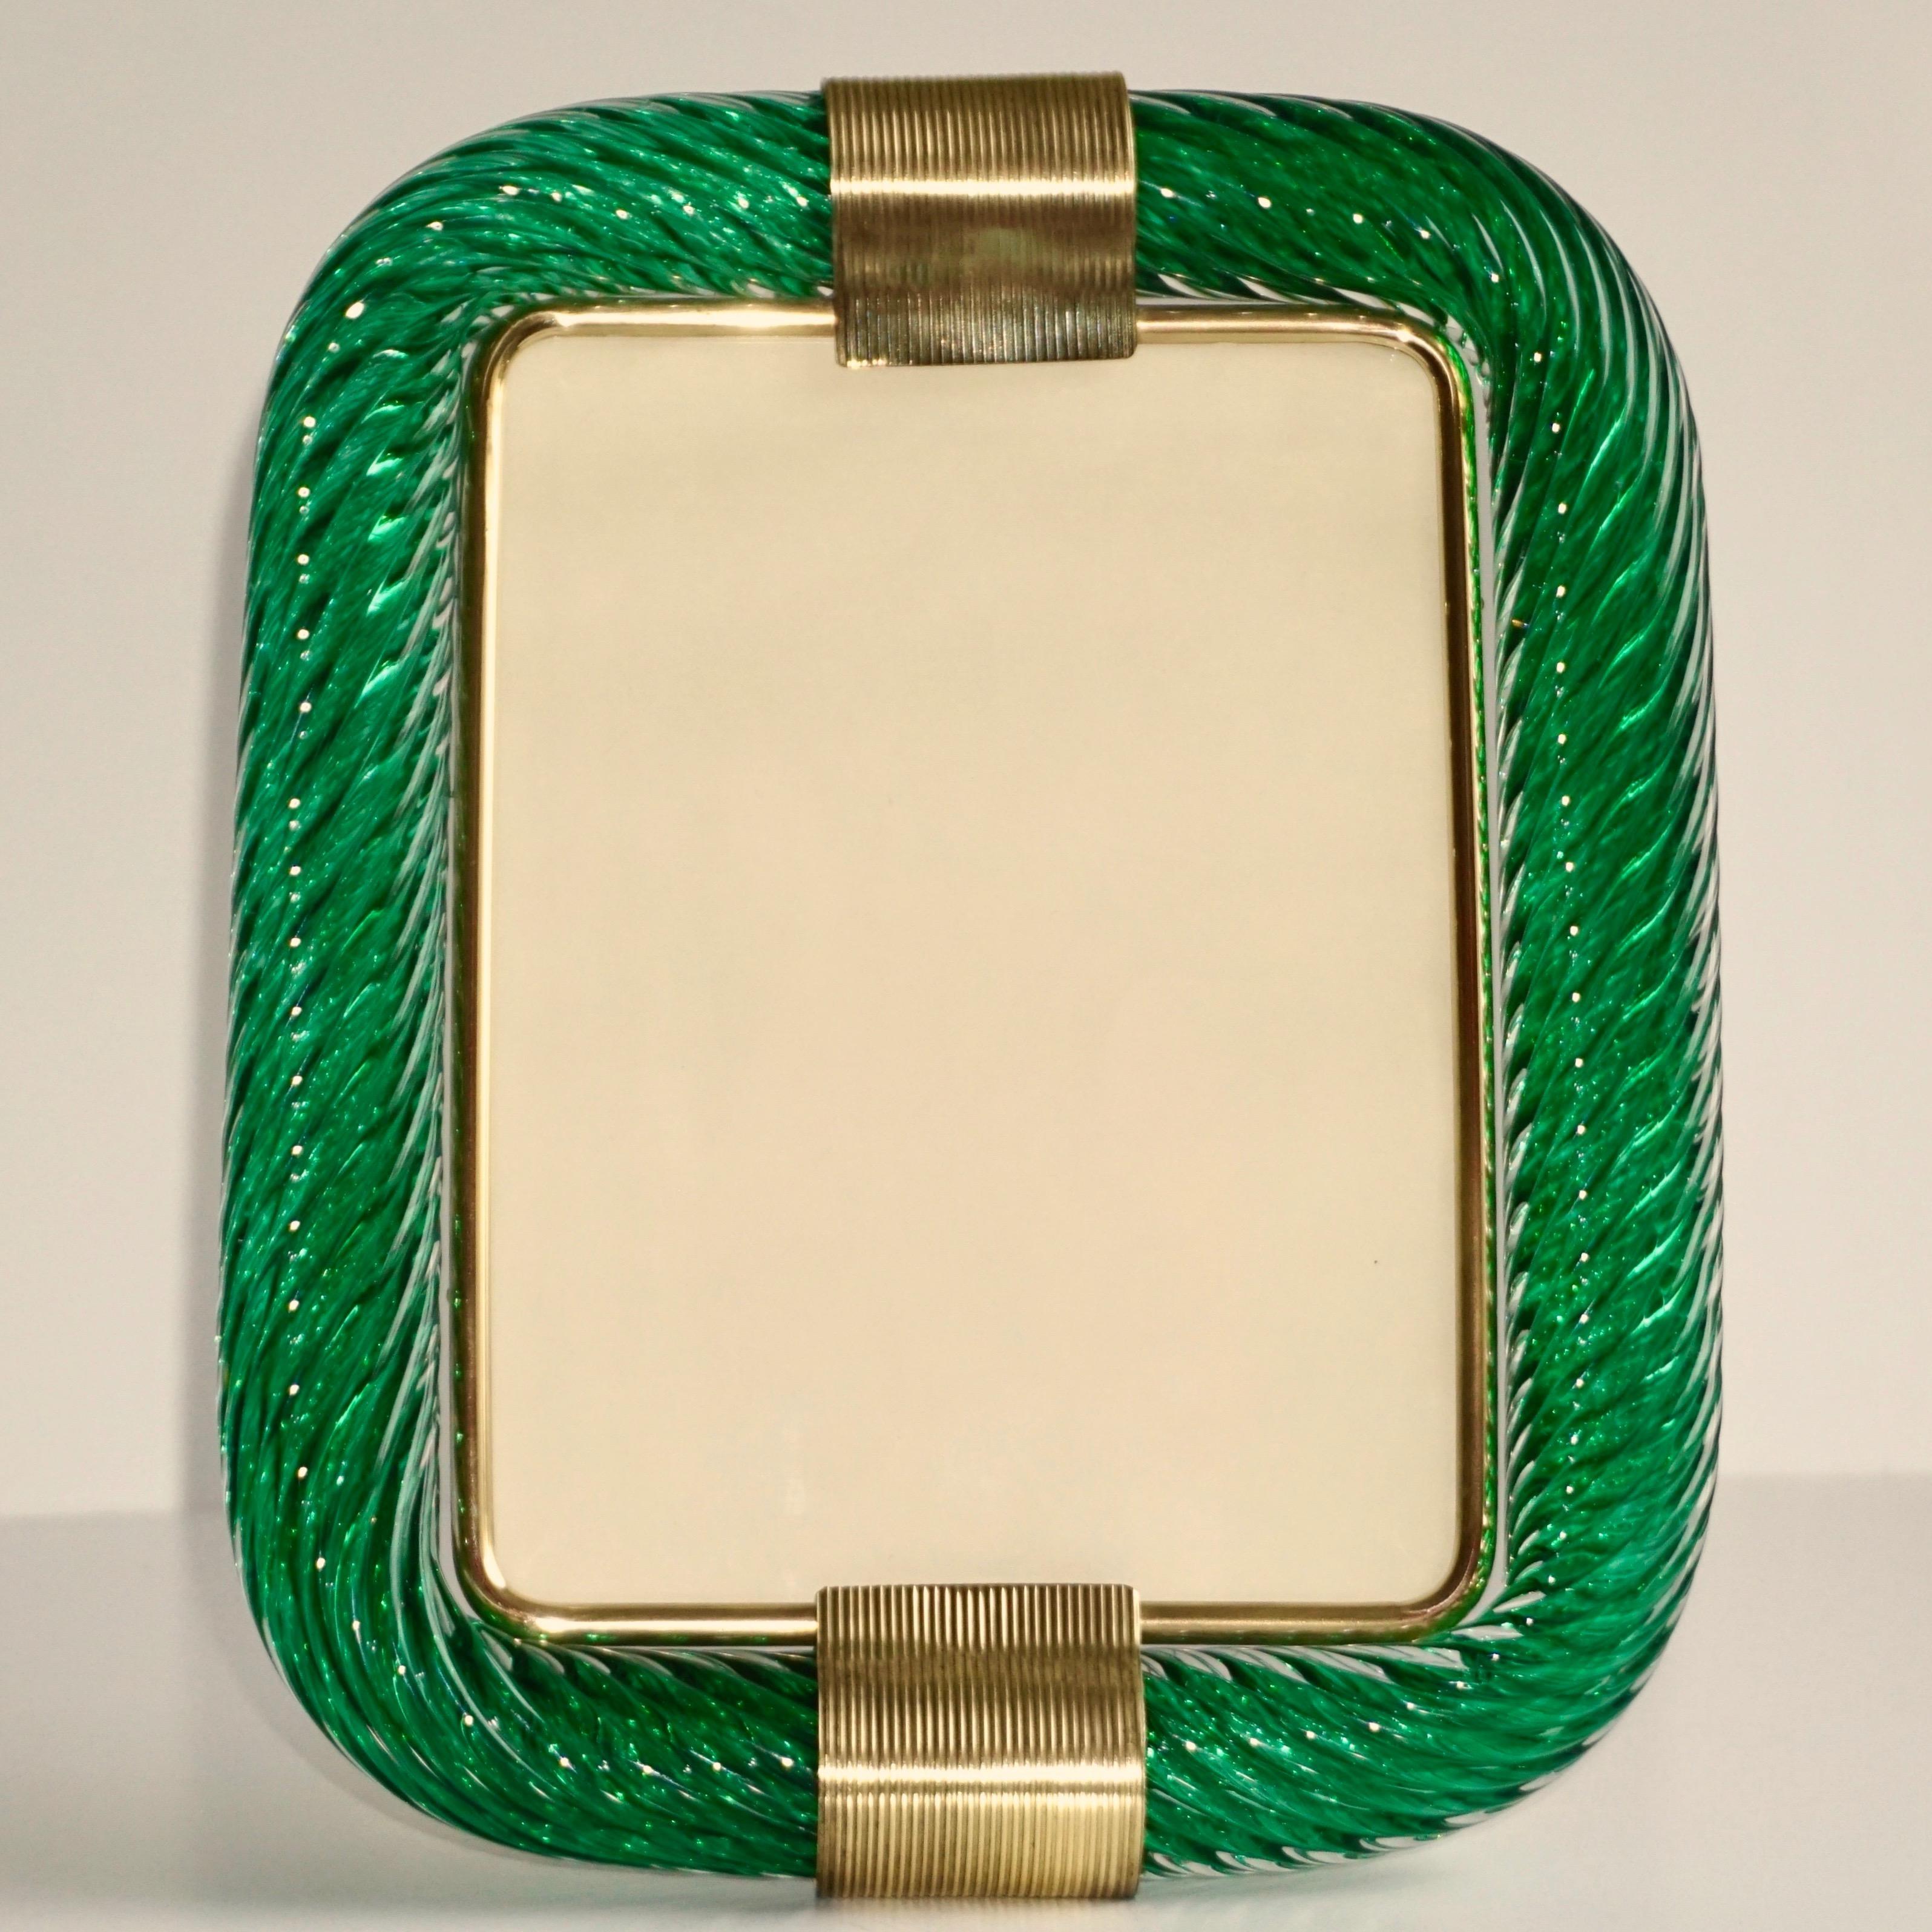 Sophisticated and elegant vintage picture frame of big size, in thick blown Murano glass of attractive glowing forest green color, entirely handcrafted in Italy. The Murano glass frame worked with Torciglione technique, handcrafted twisted blown